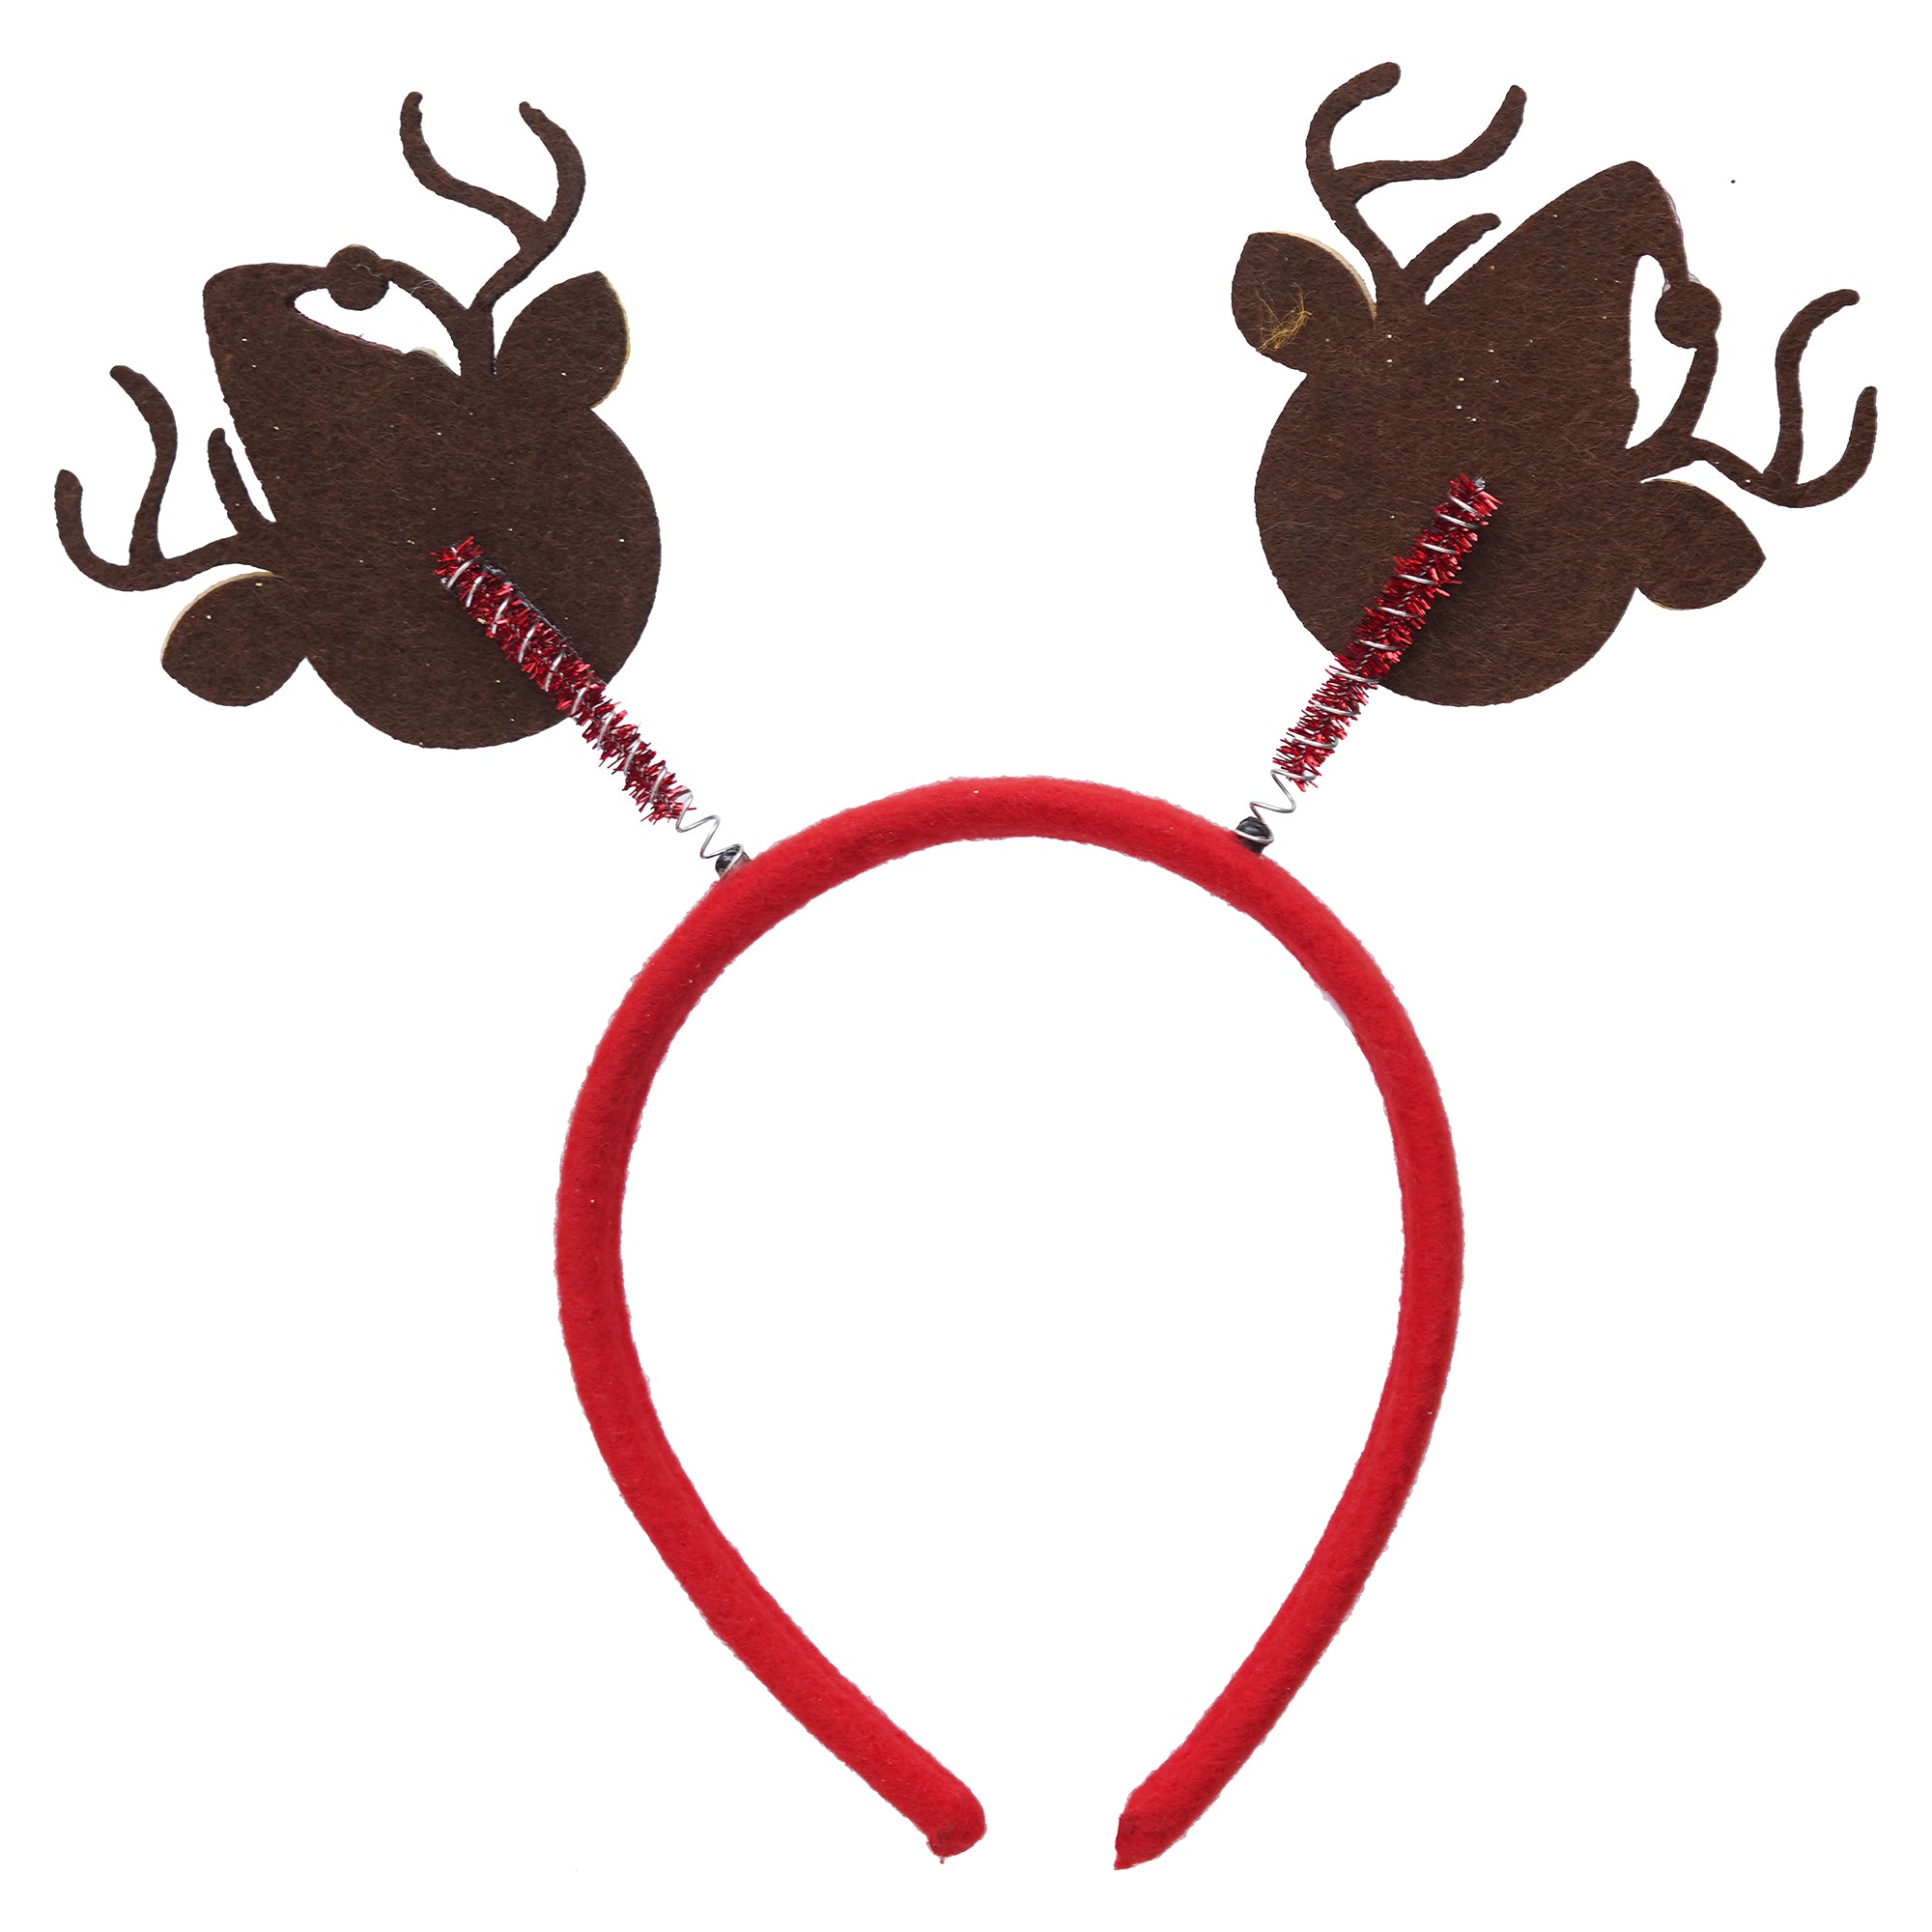 eCraftIndia Christmas Reindeer Design Headband for Christmas and Birthday Parties  Best Gift for Women, Girls, and Kids 6